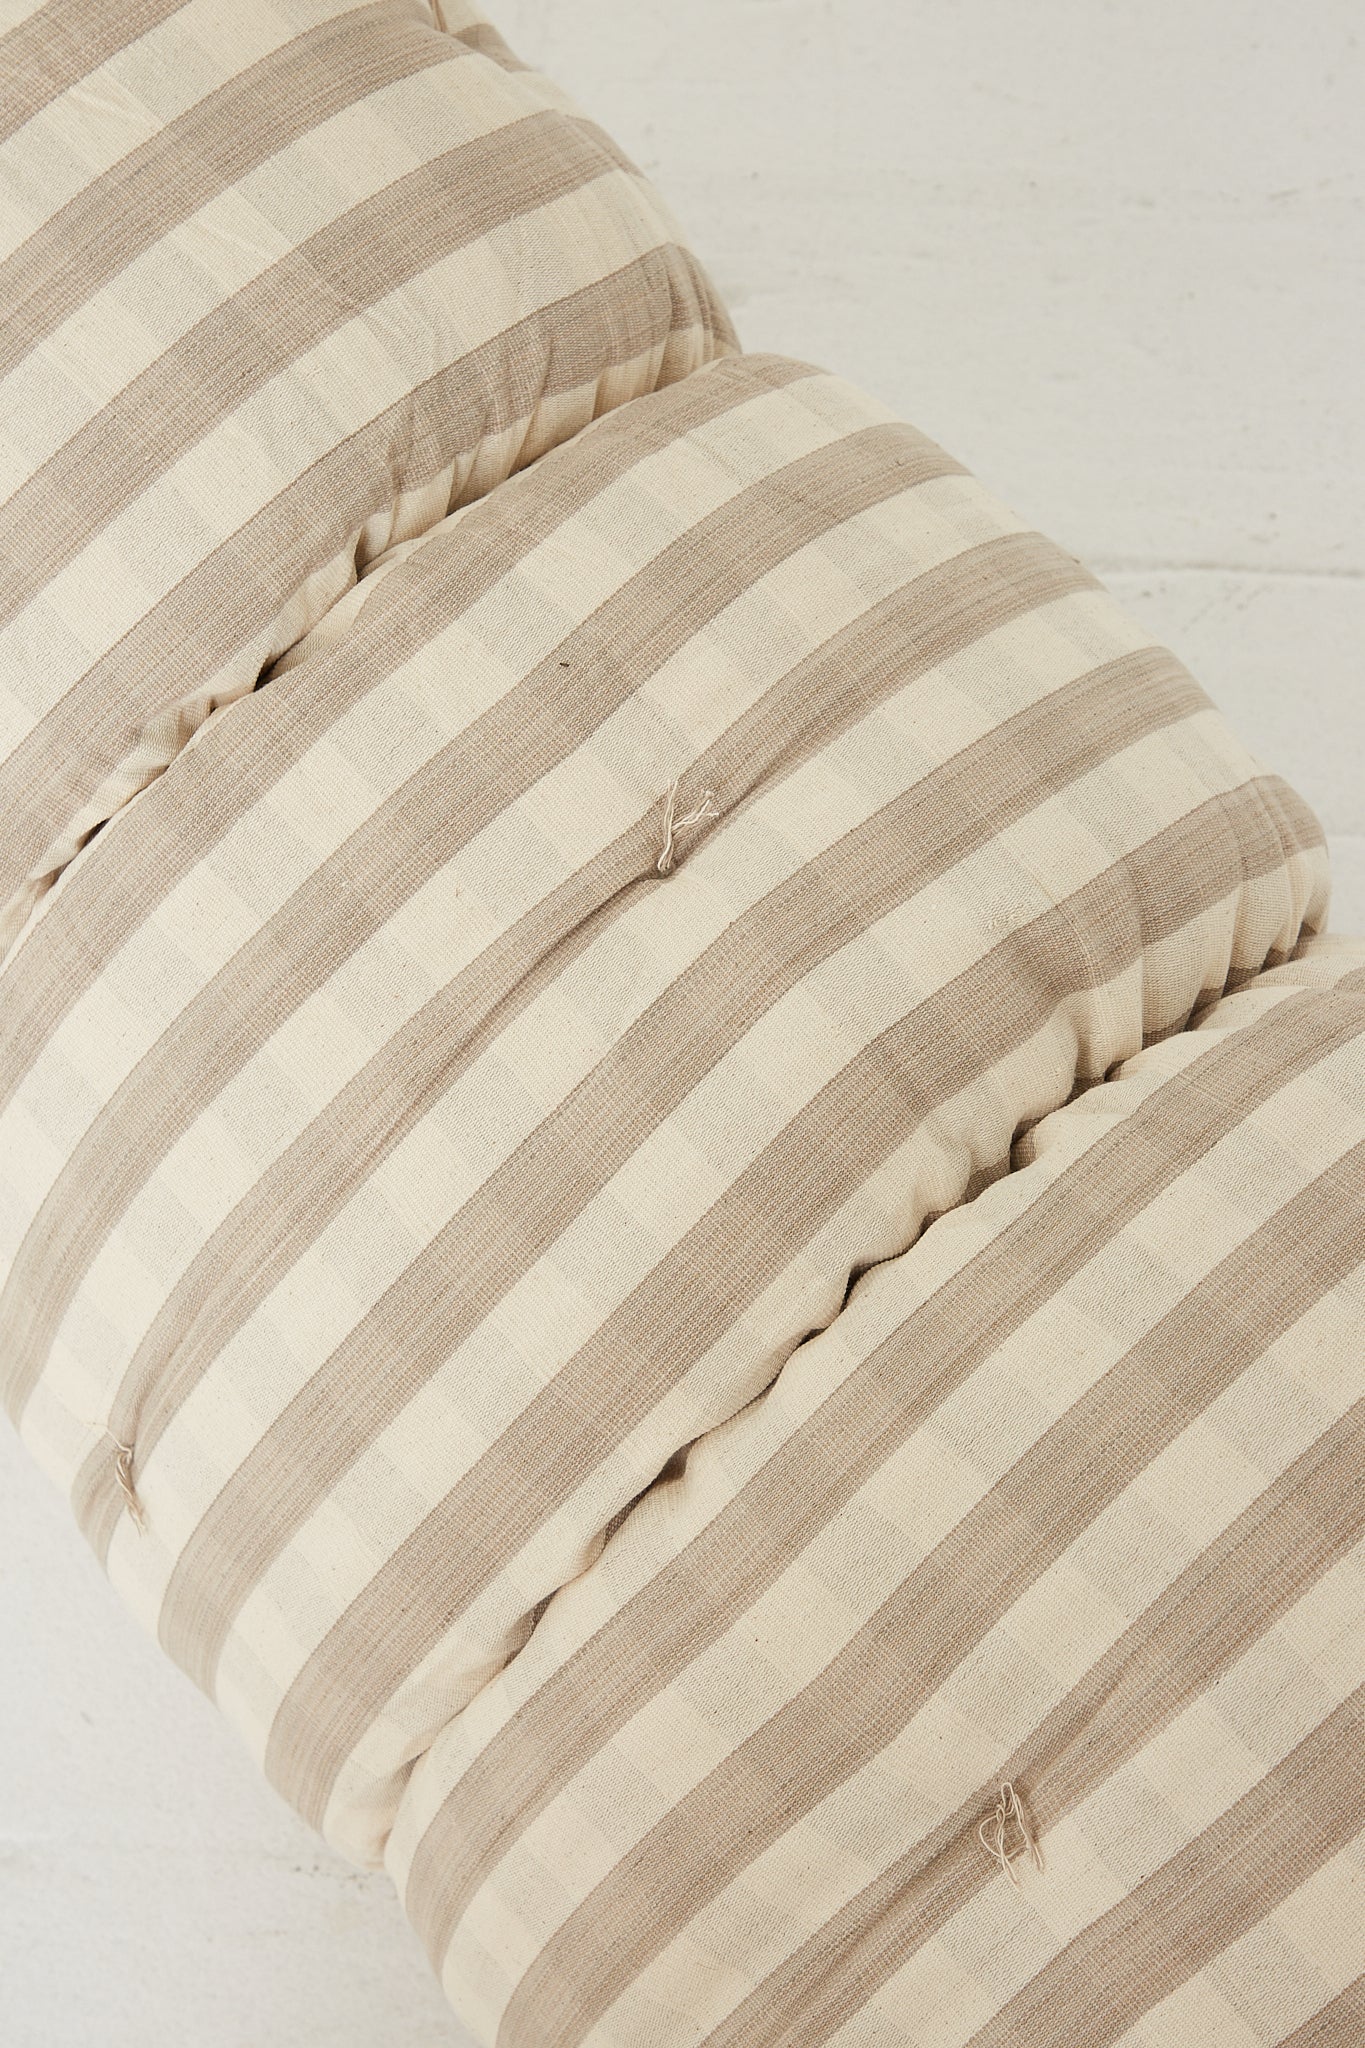 A lightweight Tufted Overlay Mattress in Greige and Off White Gingham pattern resting on a wooden floor by Tensira.